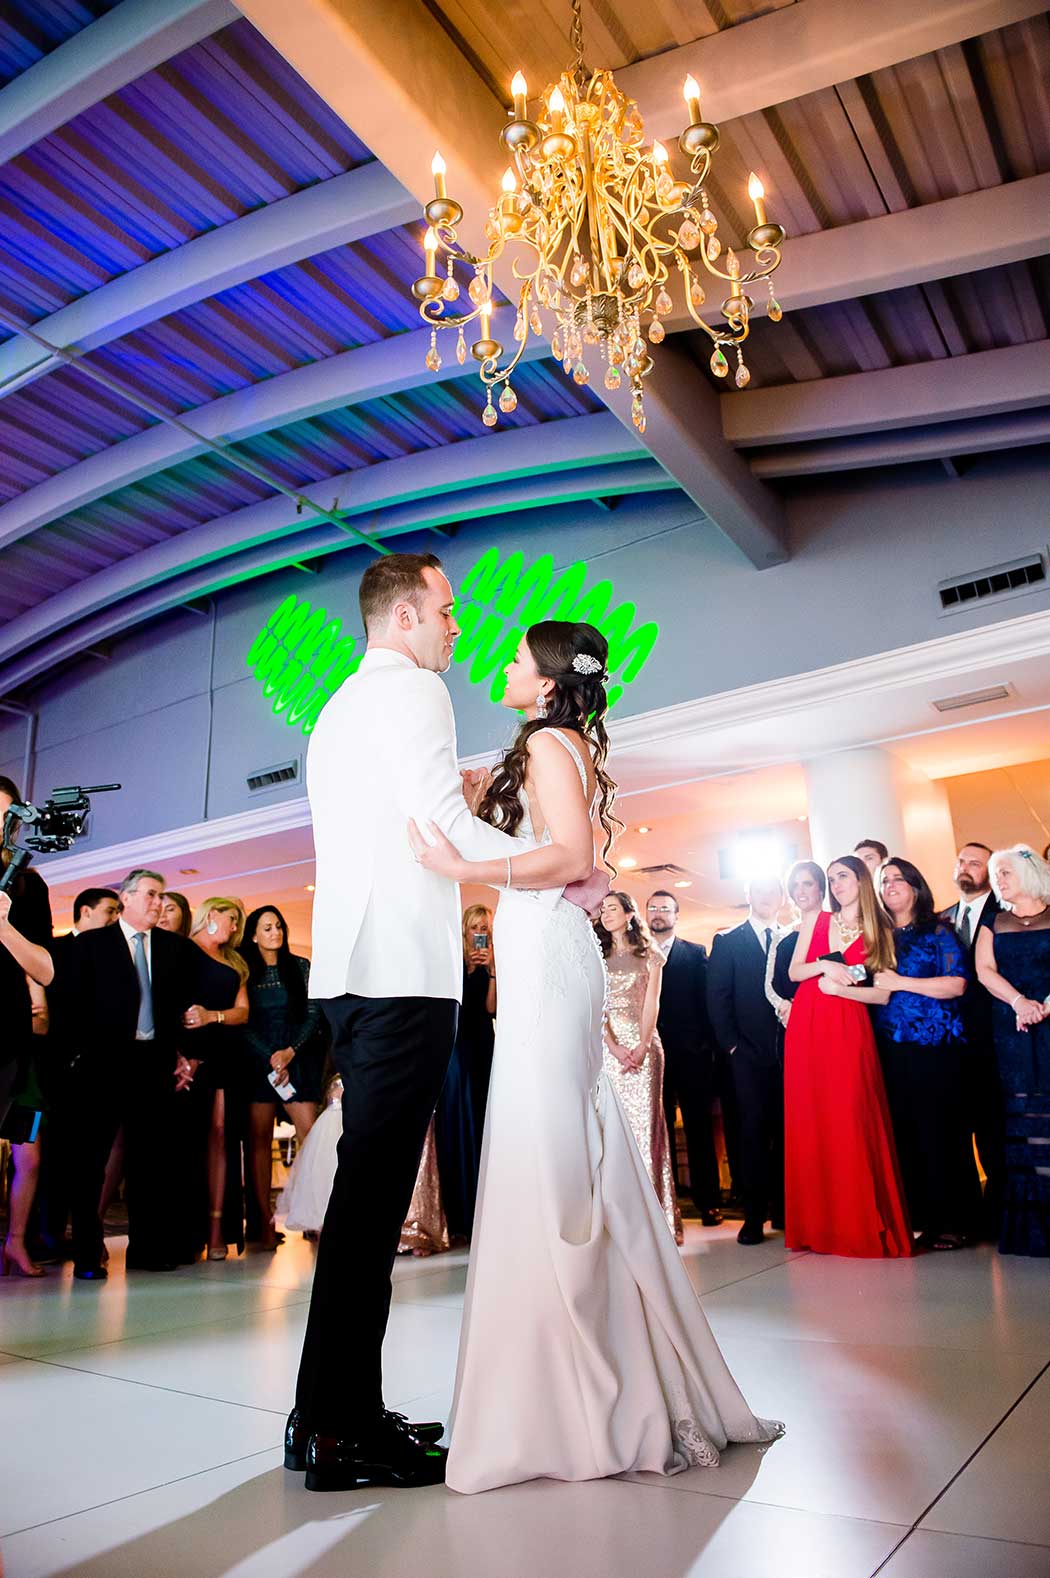 beautiful first dance with bride and groom | wedding photographer fort lauderdale